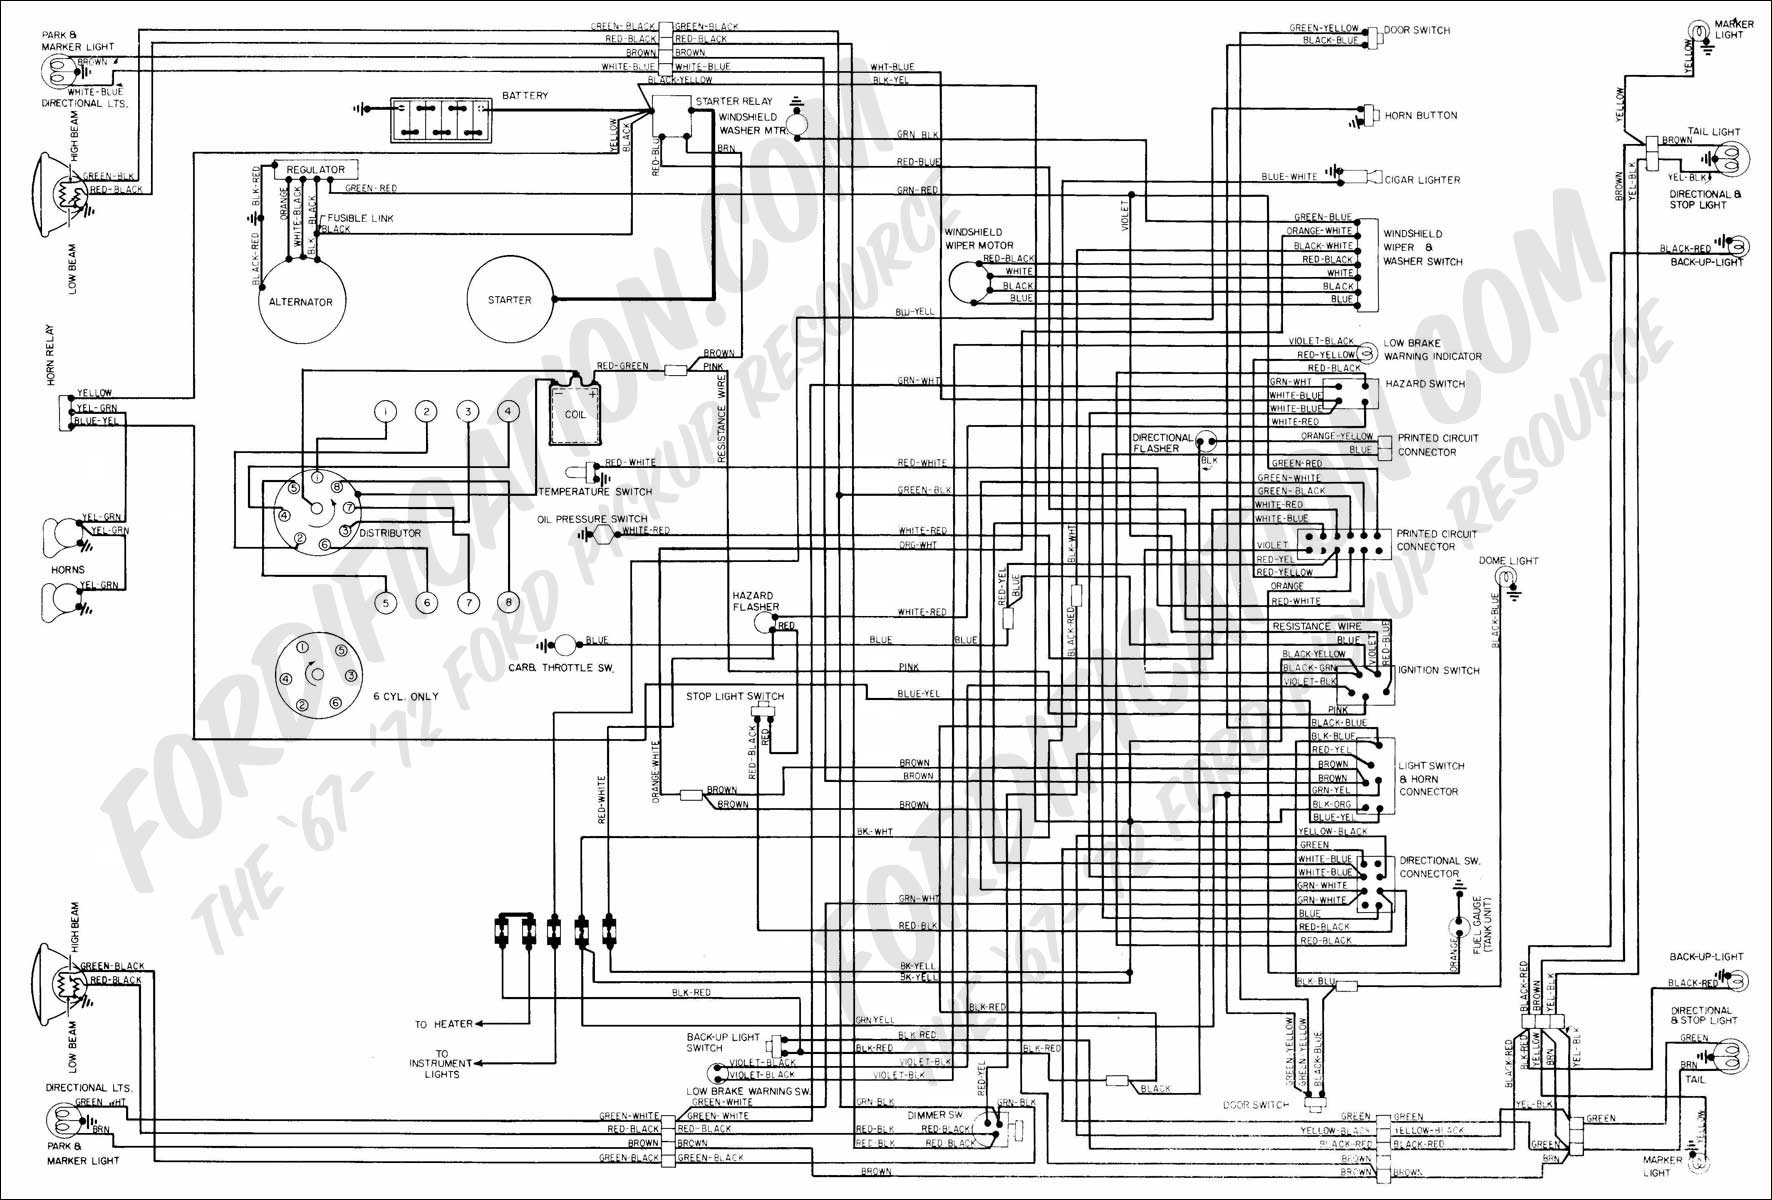 Ford Transit Engine Diagram ford Truck Brake Diagrams F700 Http Wwwfordtrucks forums Wiring Of Ford Transit Engine Diagram